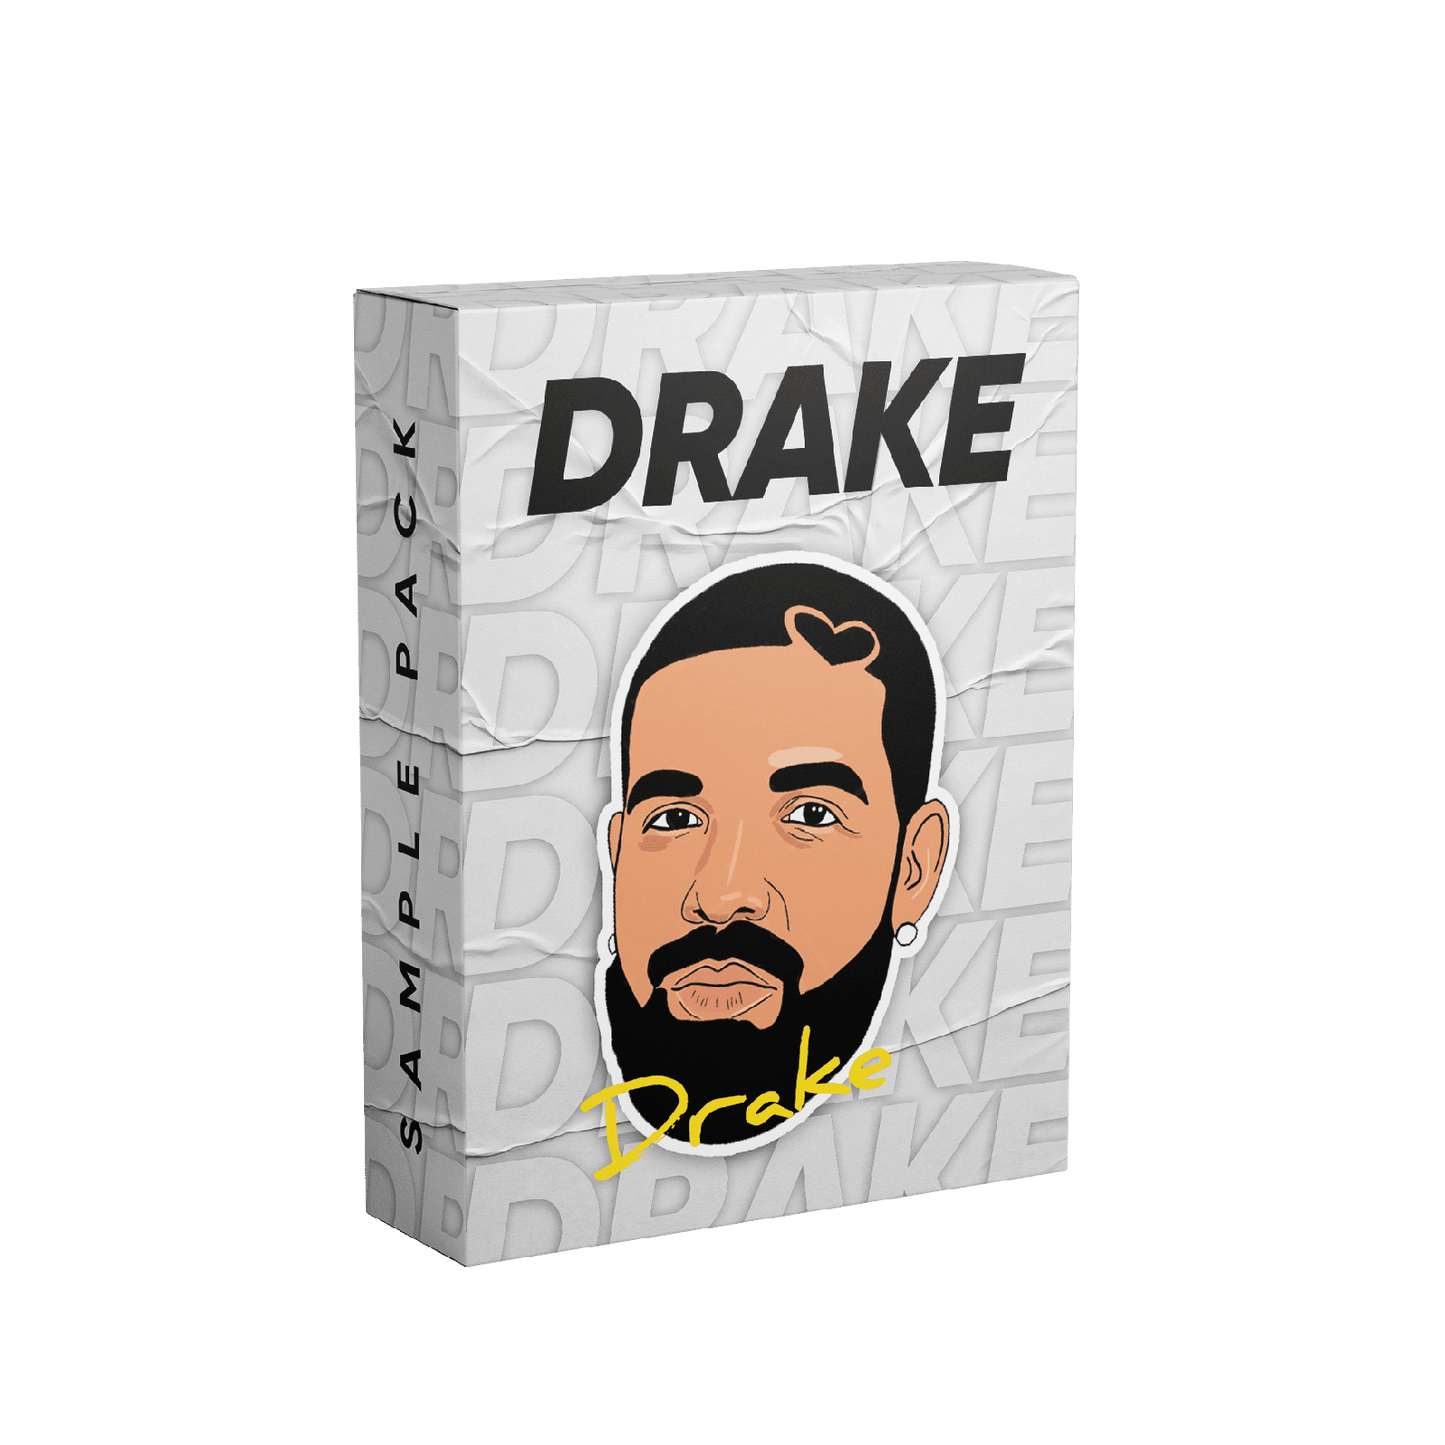 Drake Sample Pack with white background and Drake's face on it